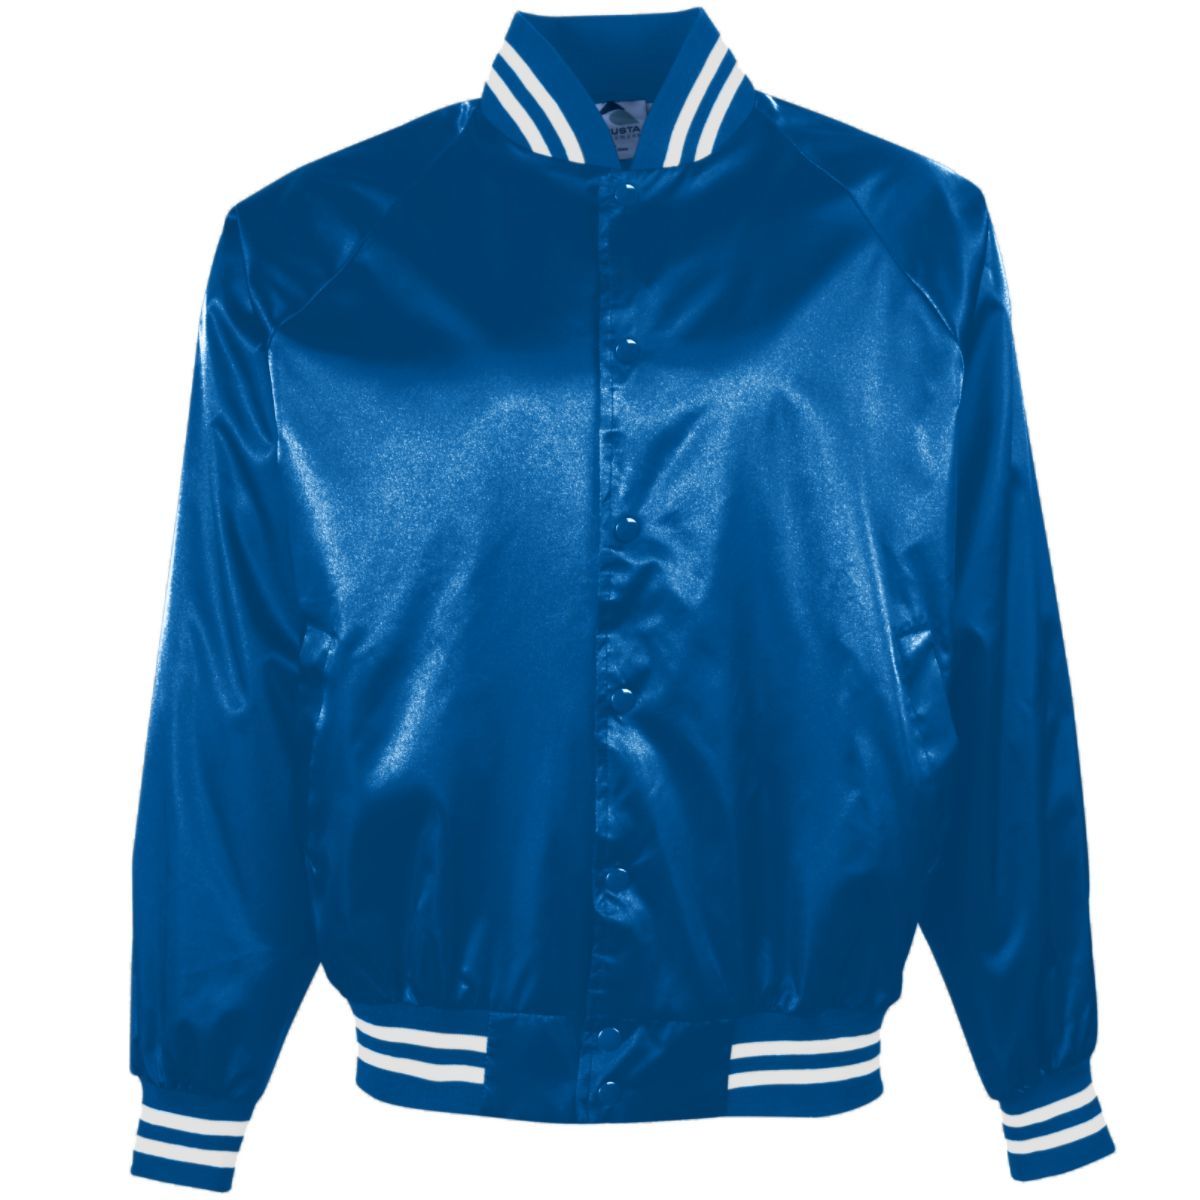 Augusta Sportswear Satin Baseball Jacket/Striped Trim in Royal/White  -Part of the Adult, Adult-Jacket, Augusta-Products, Baseball, Outerwear, All-Sports, All-Sports-1 product lines at KanaleyCreations.com